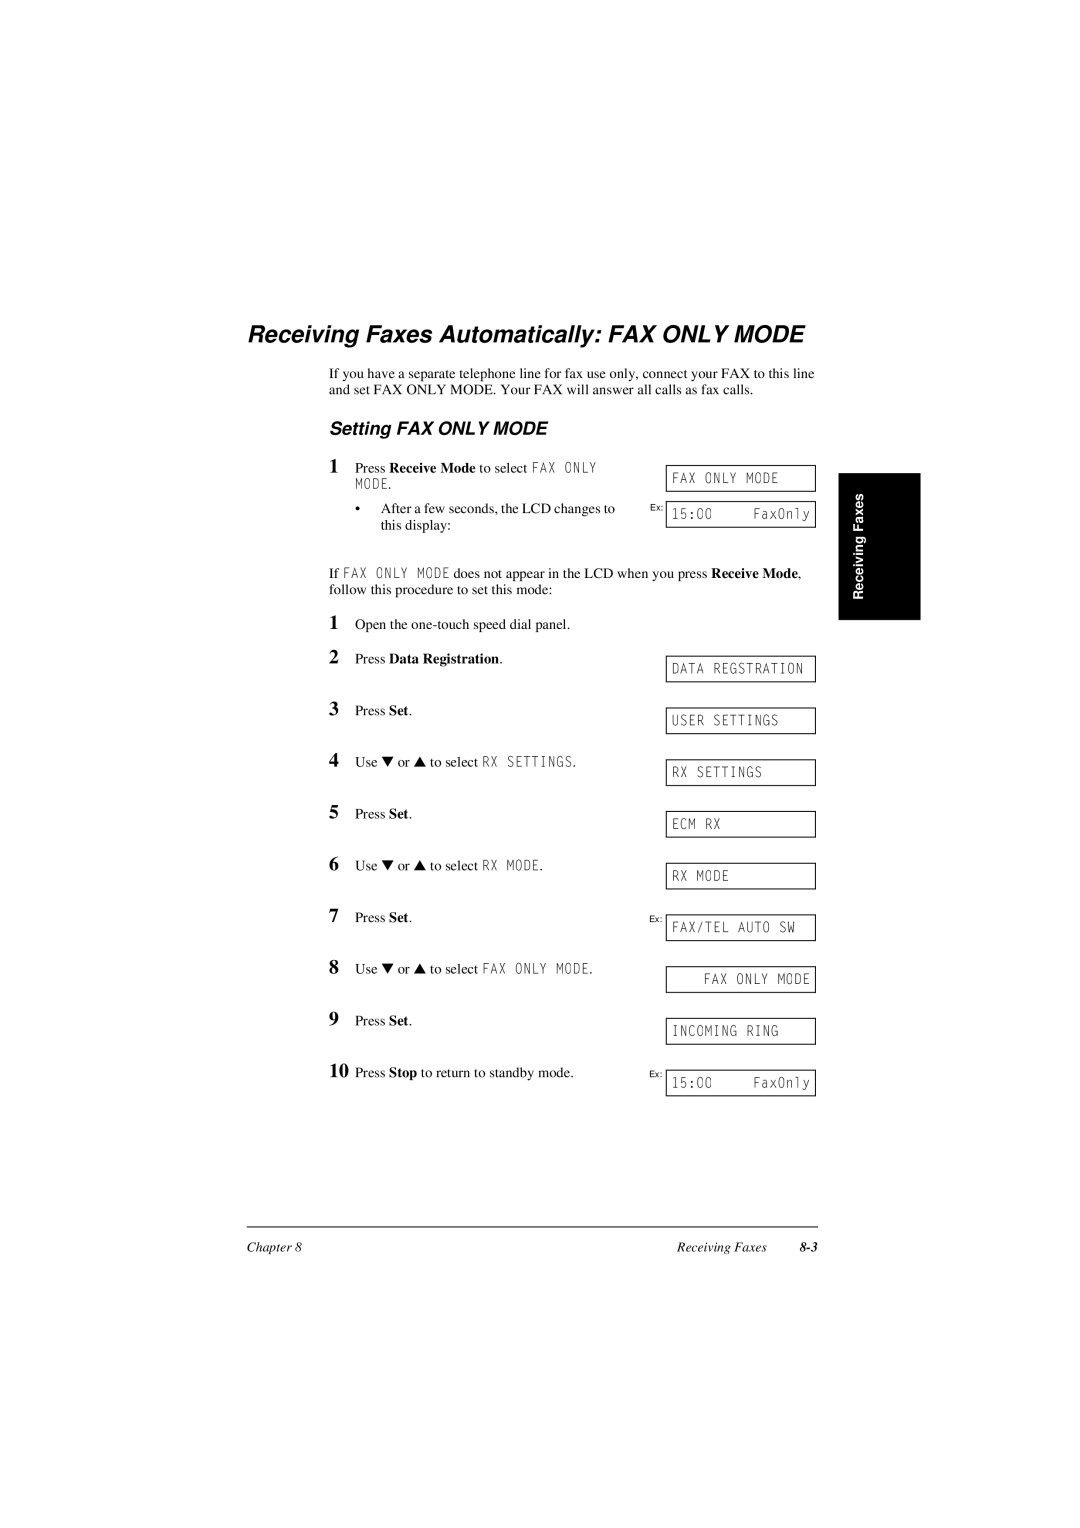 Canon L240, L290 manual Receiving Faxes Automatically FAX ONLY MODE, Setting FAX ONLY MODEFAX, Press Data Registration 